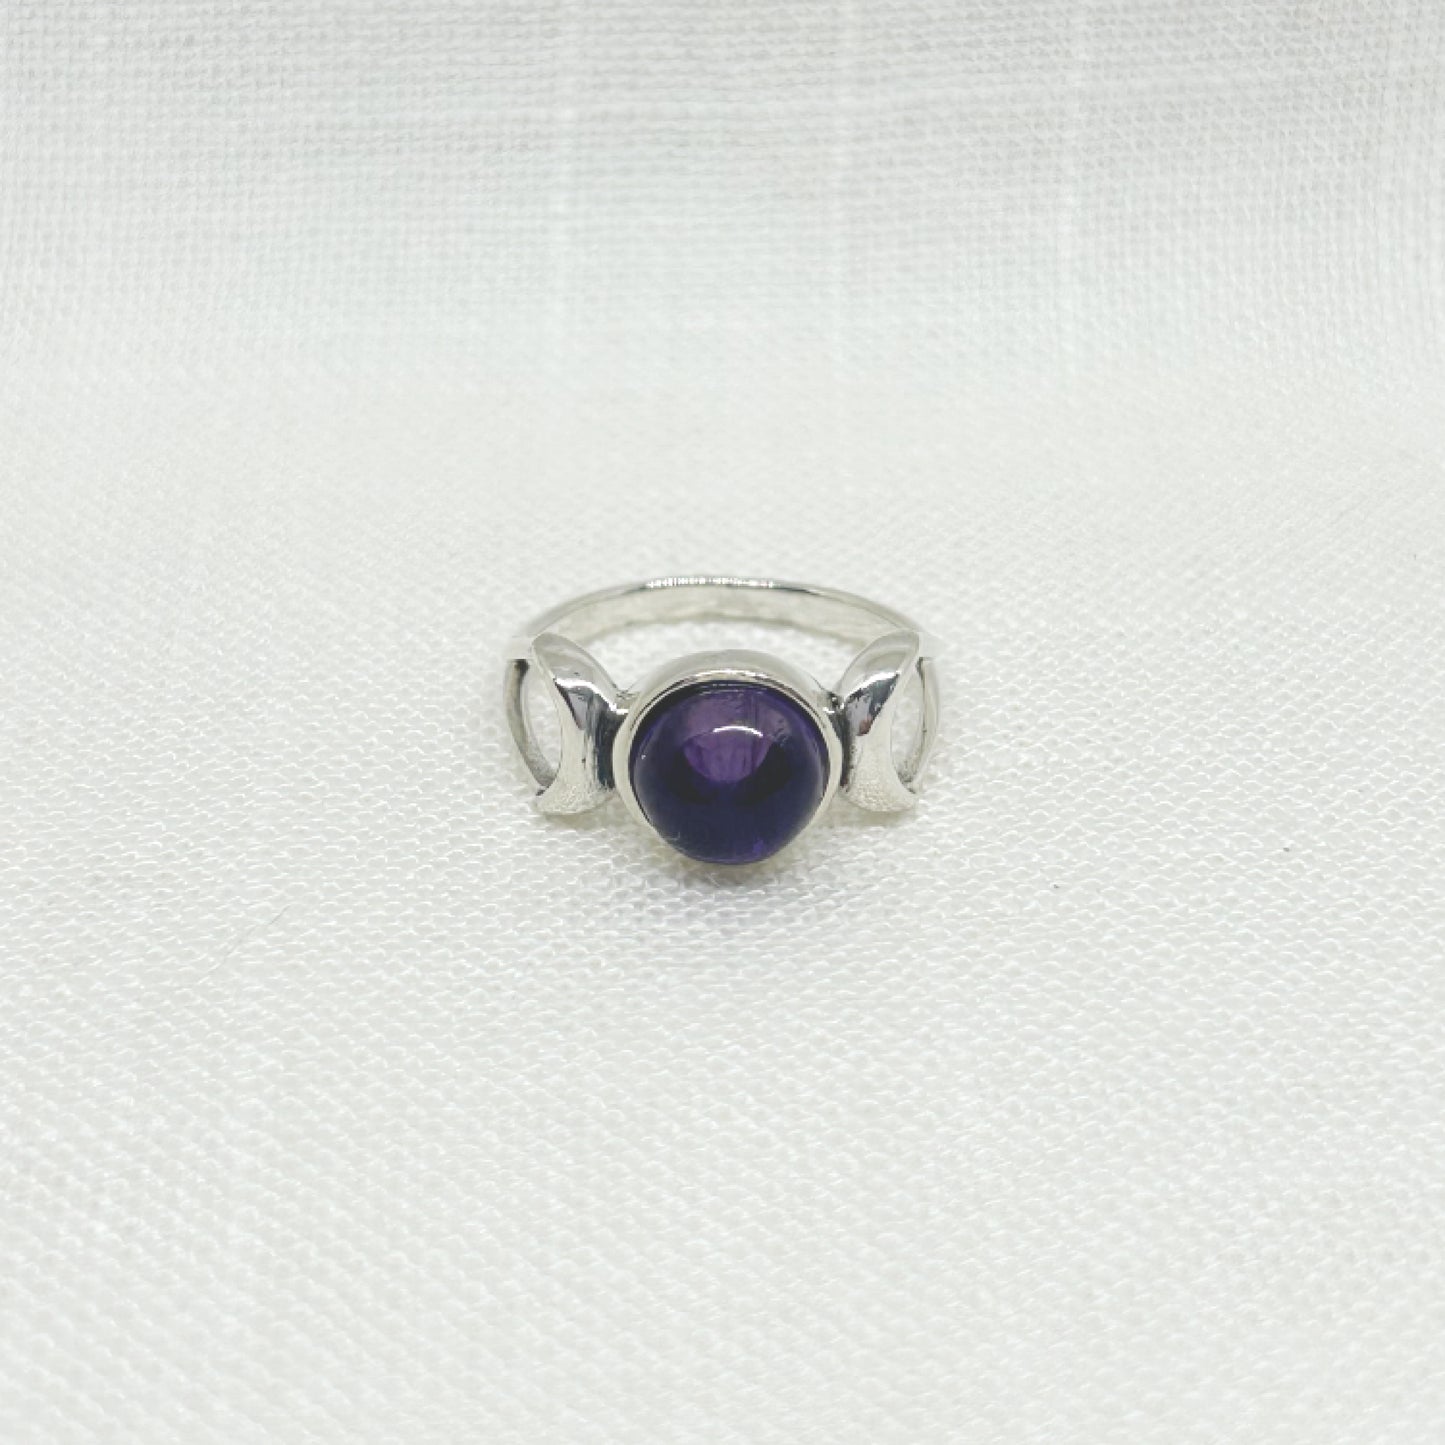 With a generous 0.8cm amethyst cabochon within the centre moon and a crescent moon either side, this beautiful triple moon ring represents the Goddess in her 3 main phases: waxing, full and waning. This ring is set in .925 silver and is hallmarked. All jewellery comes gift boxed.